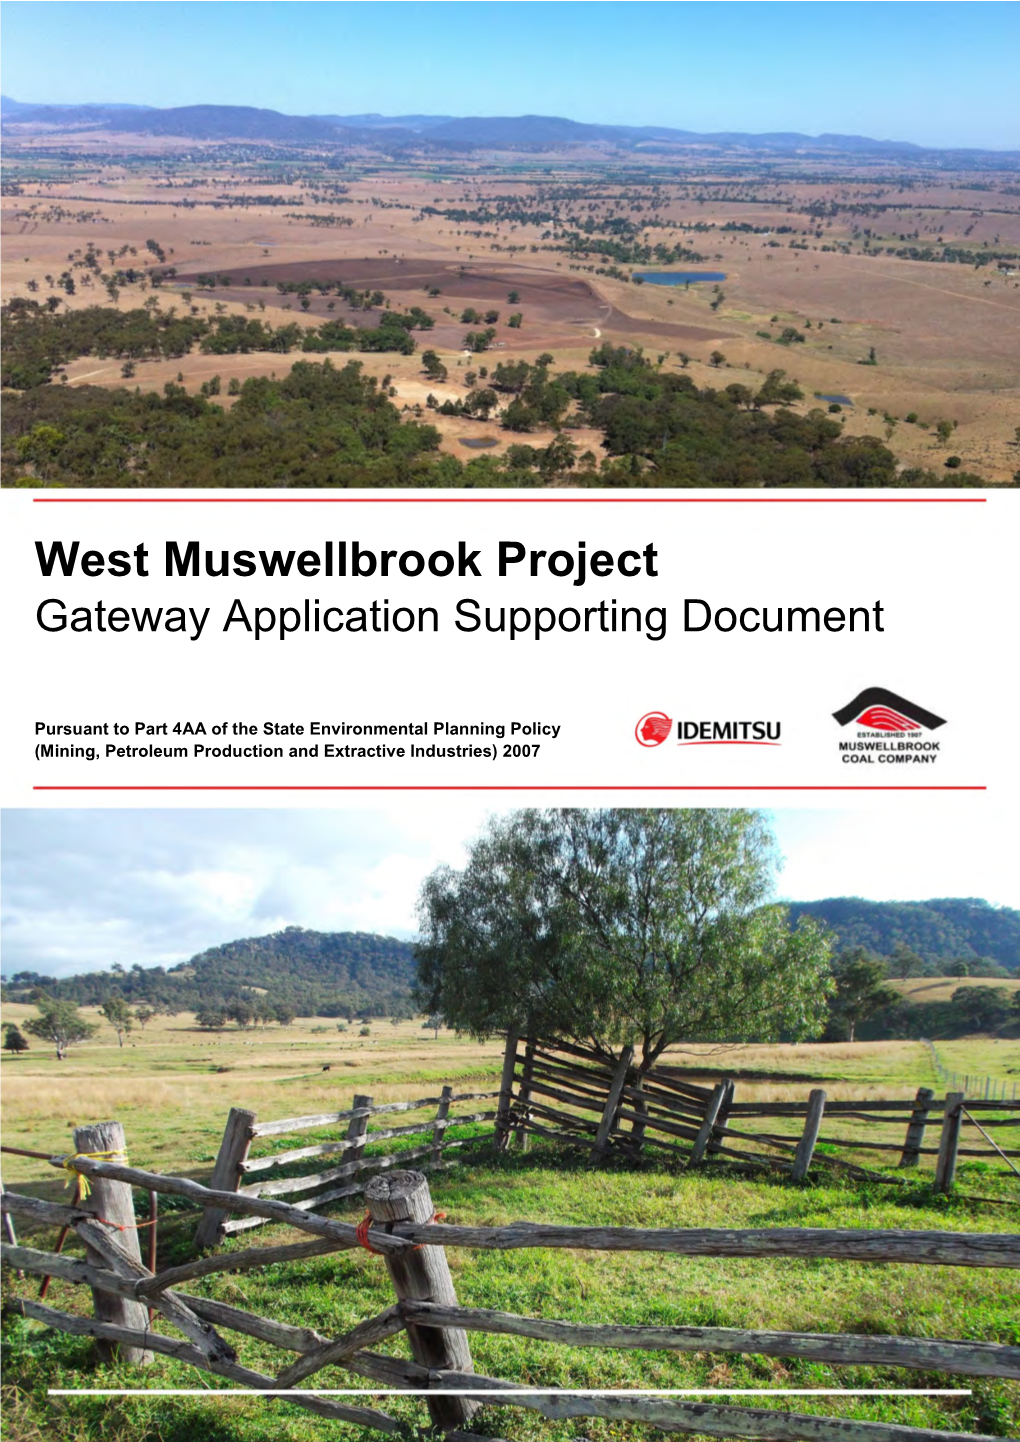 West Muswellbrook Project Gateway Application Supporting Document